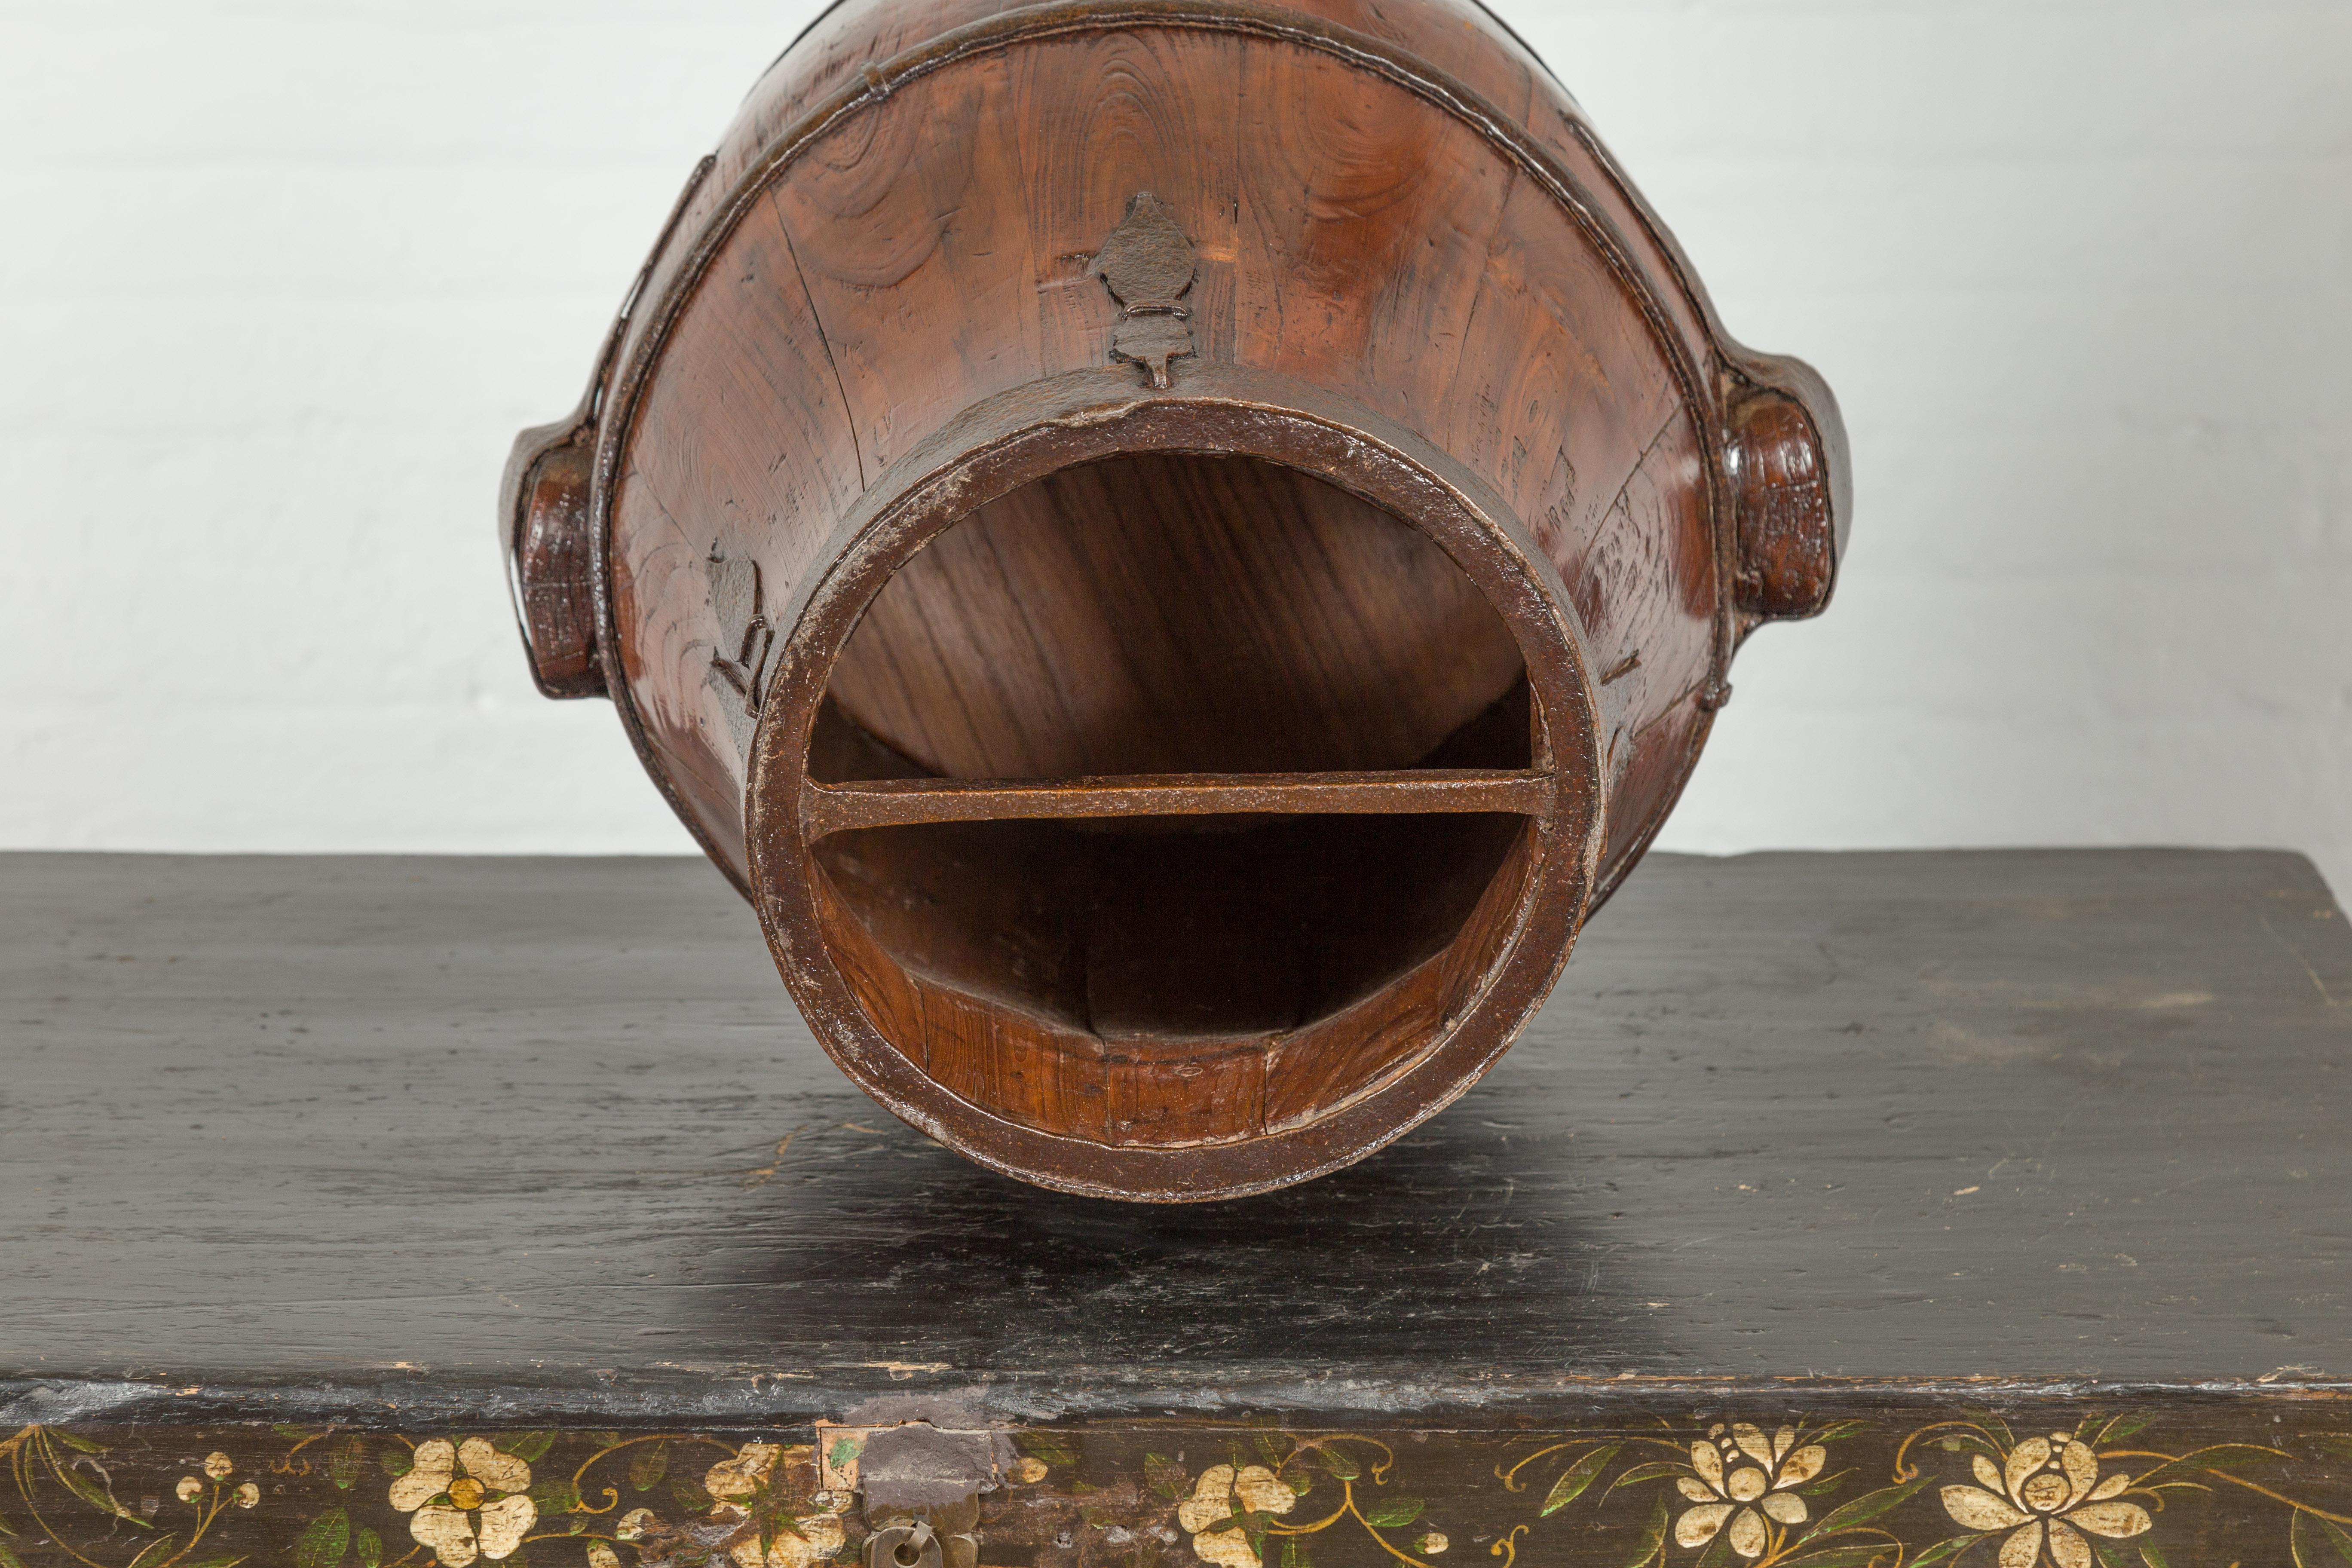 Chinese Qing Dynasty Period 19th Century Pear-Shaped Wooden Grain Basket For Sale 7